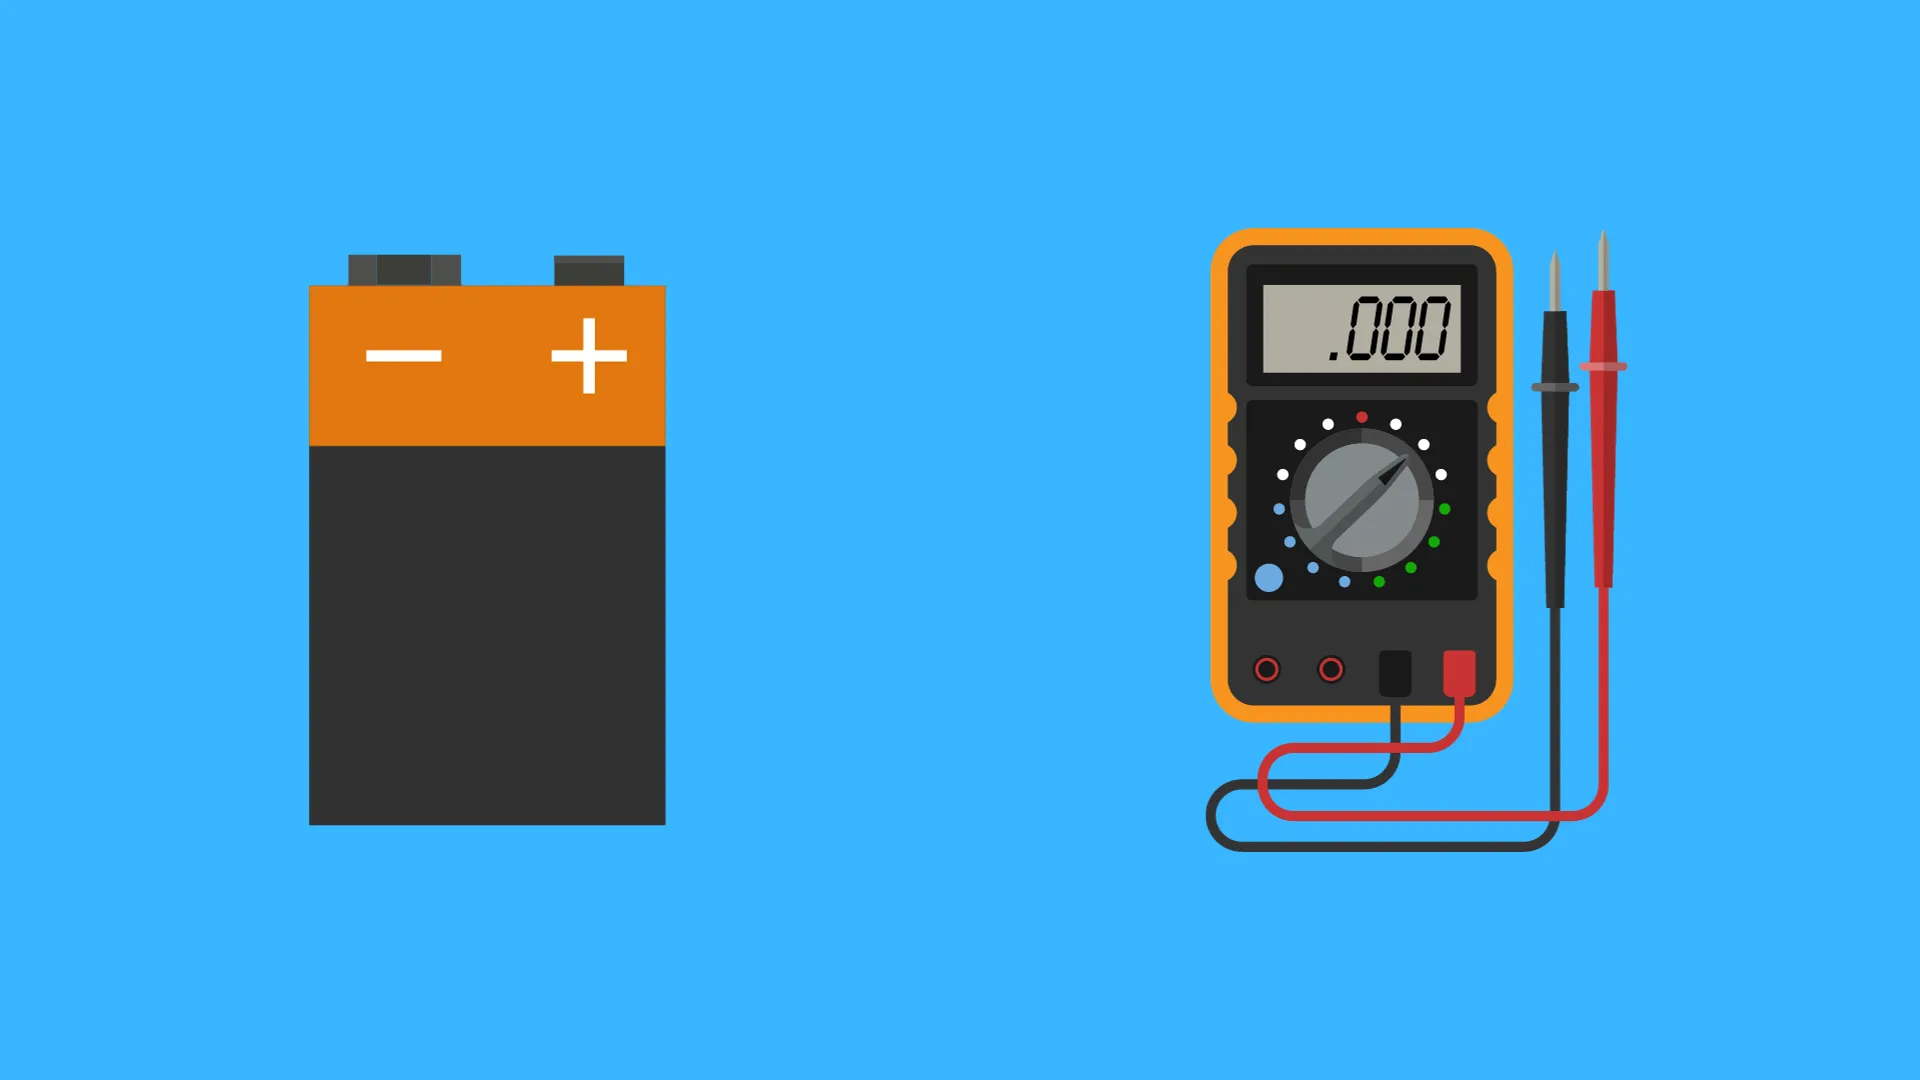 How To Test 9V Battery With Multimeter